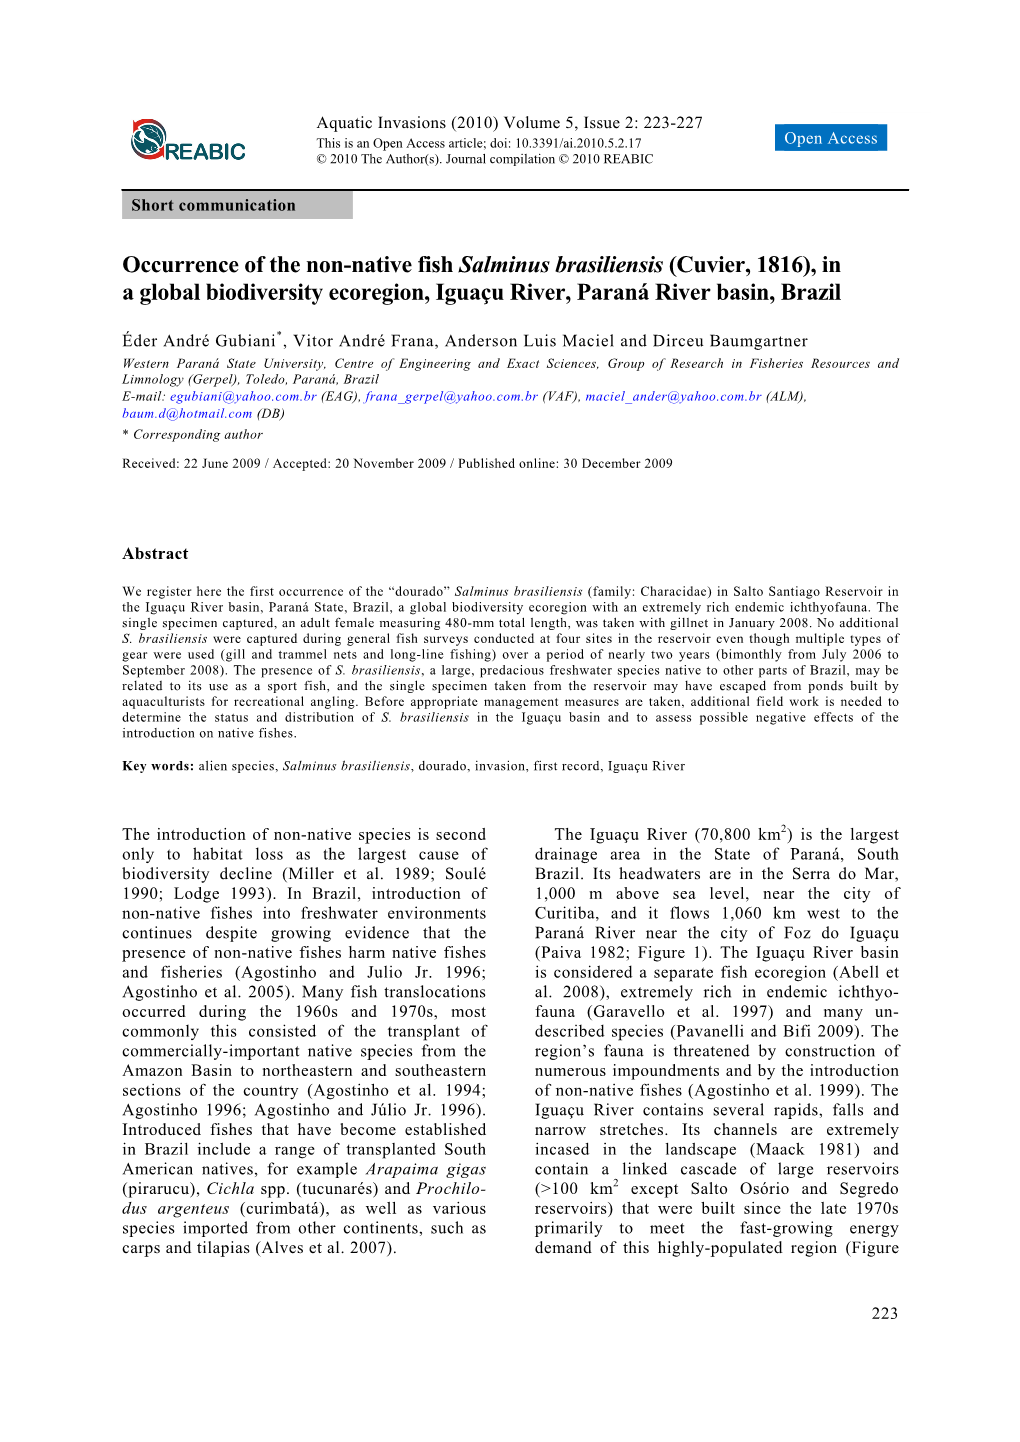 Occurrence of the Non-Native Fish Salminus Brasiliensis (Cuvier, 1816), in a Global Biodiversity Ecoregion, Iguaçu River, Paraná River Basin, Brazil